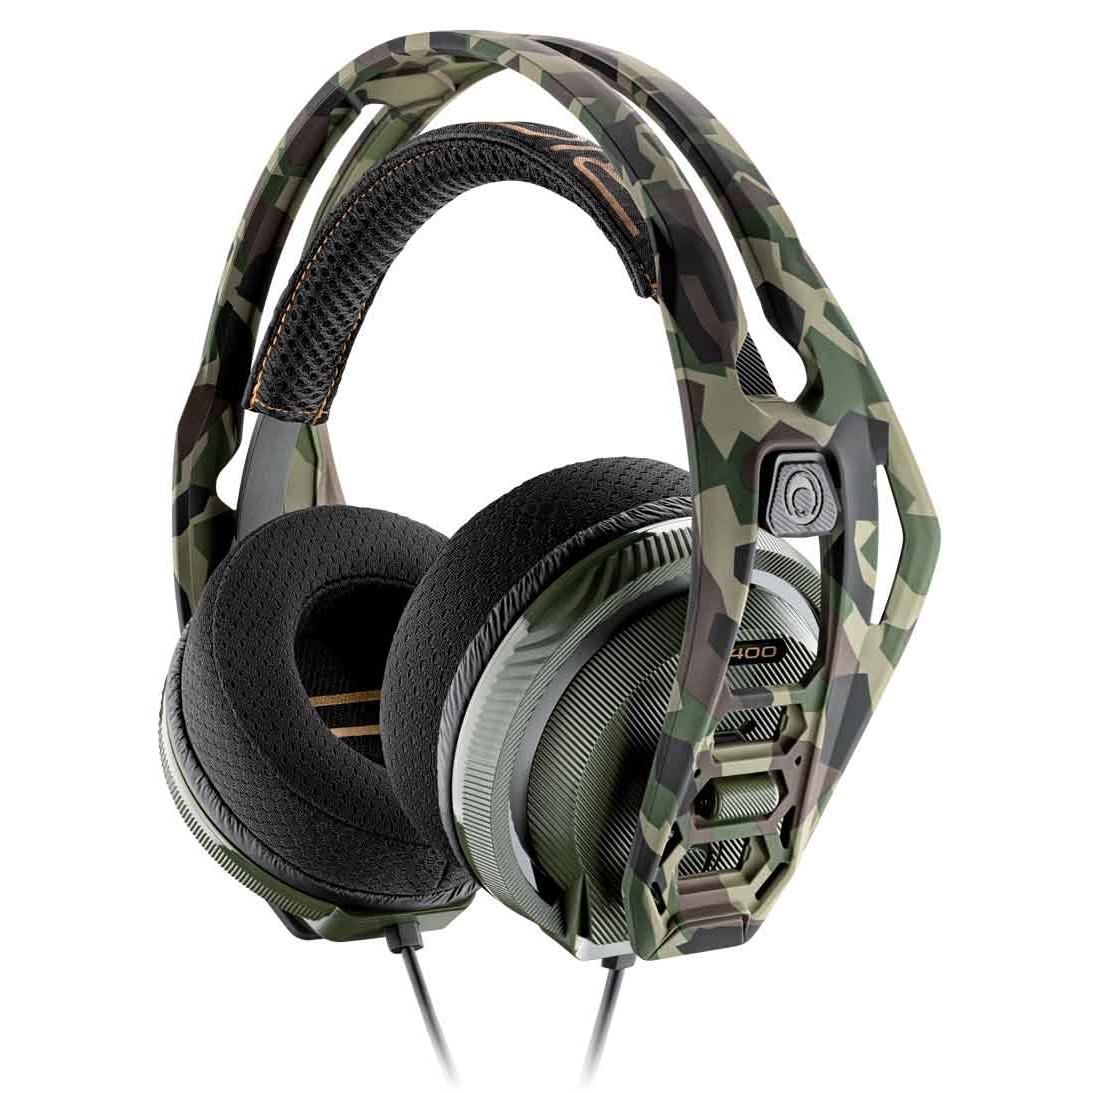 rig 400 ha gaming headset with 3d audio (forest camo)